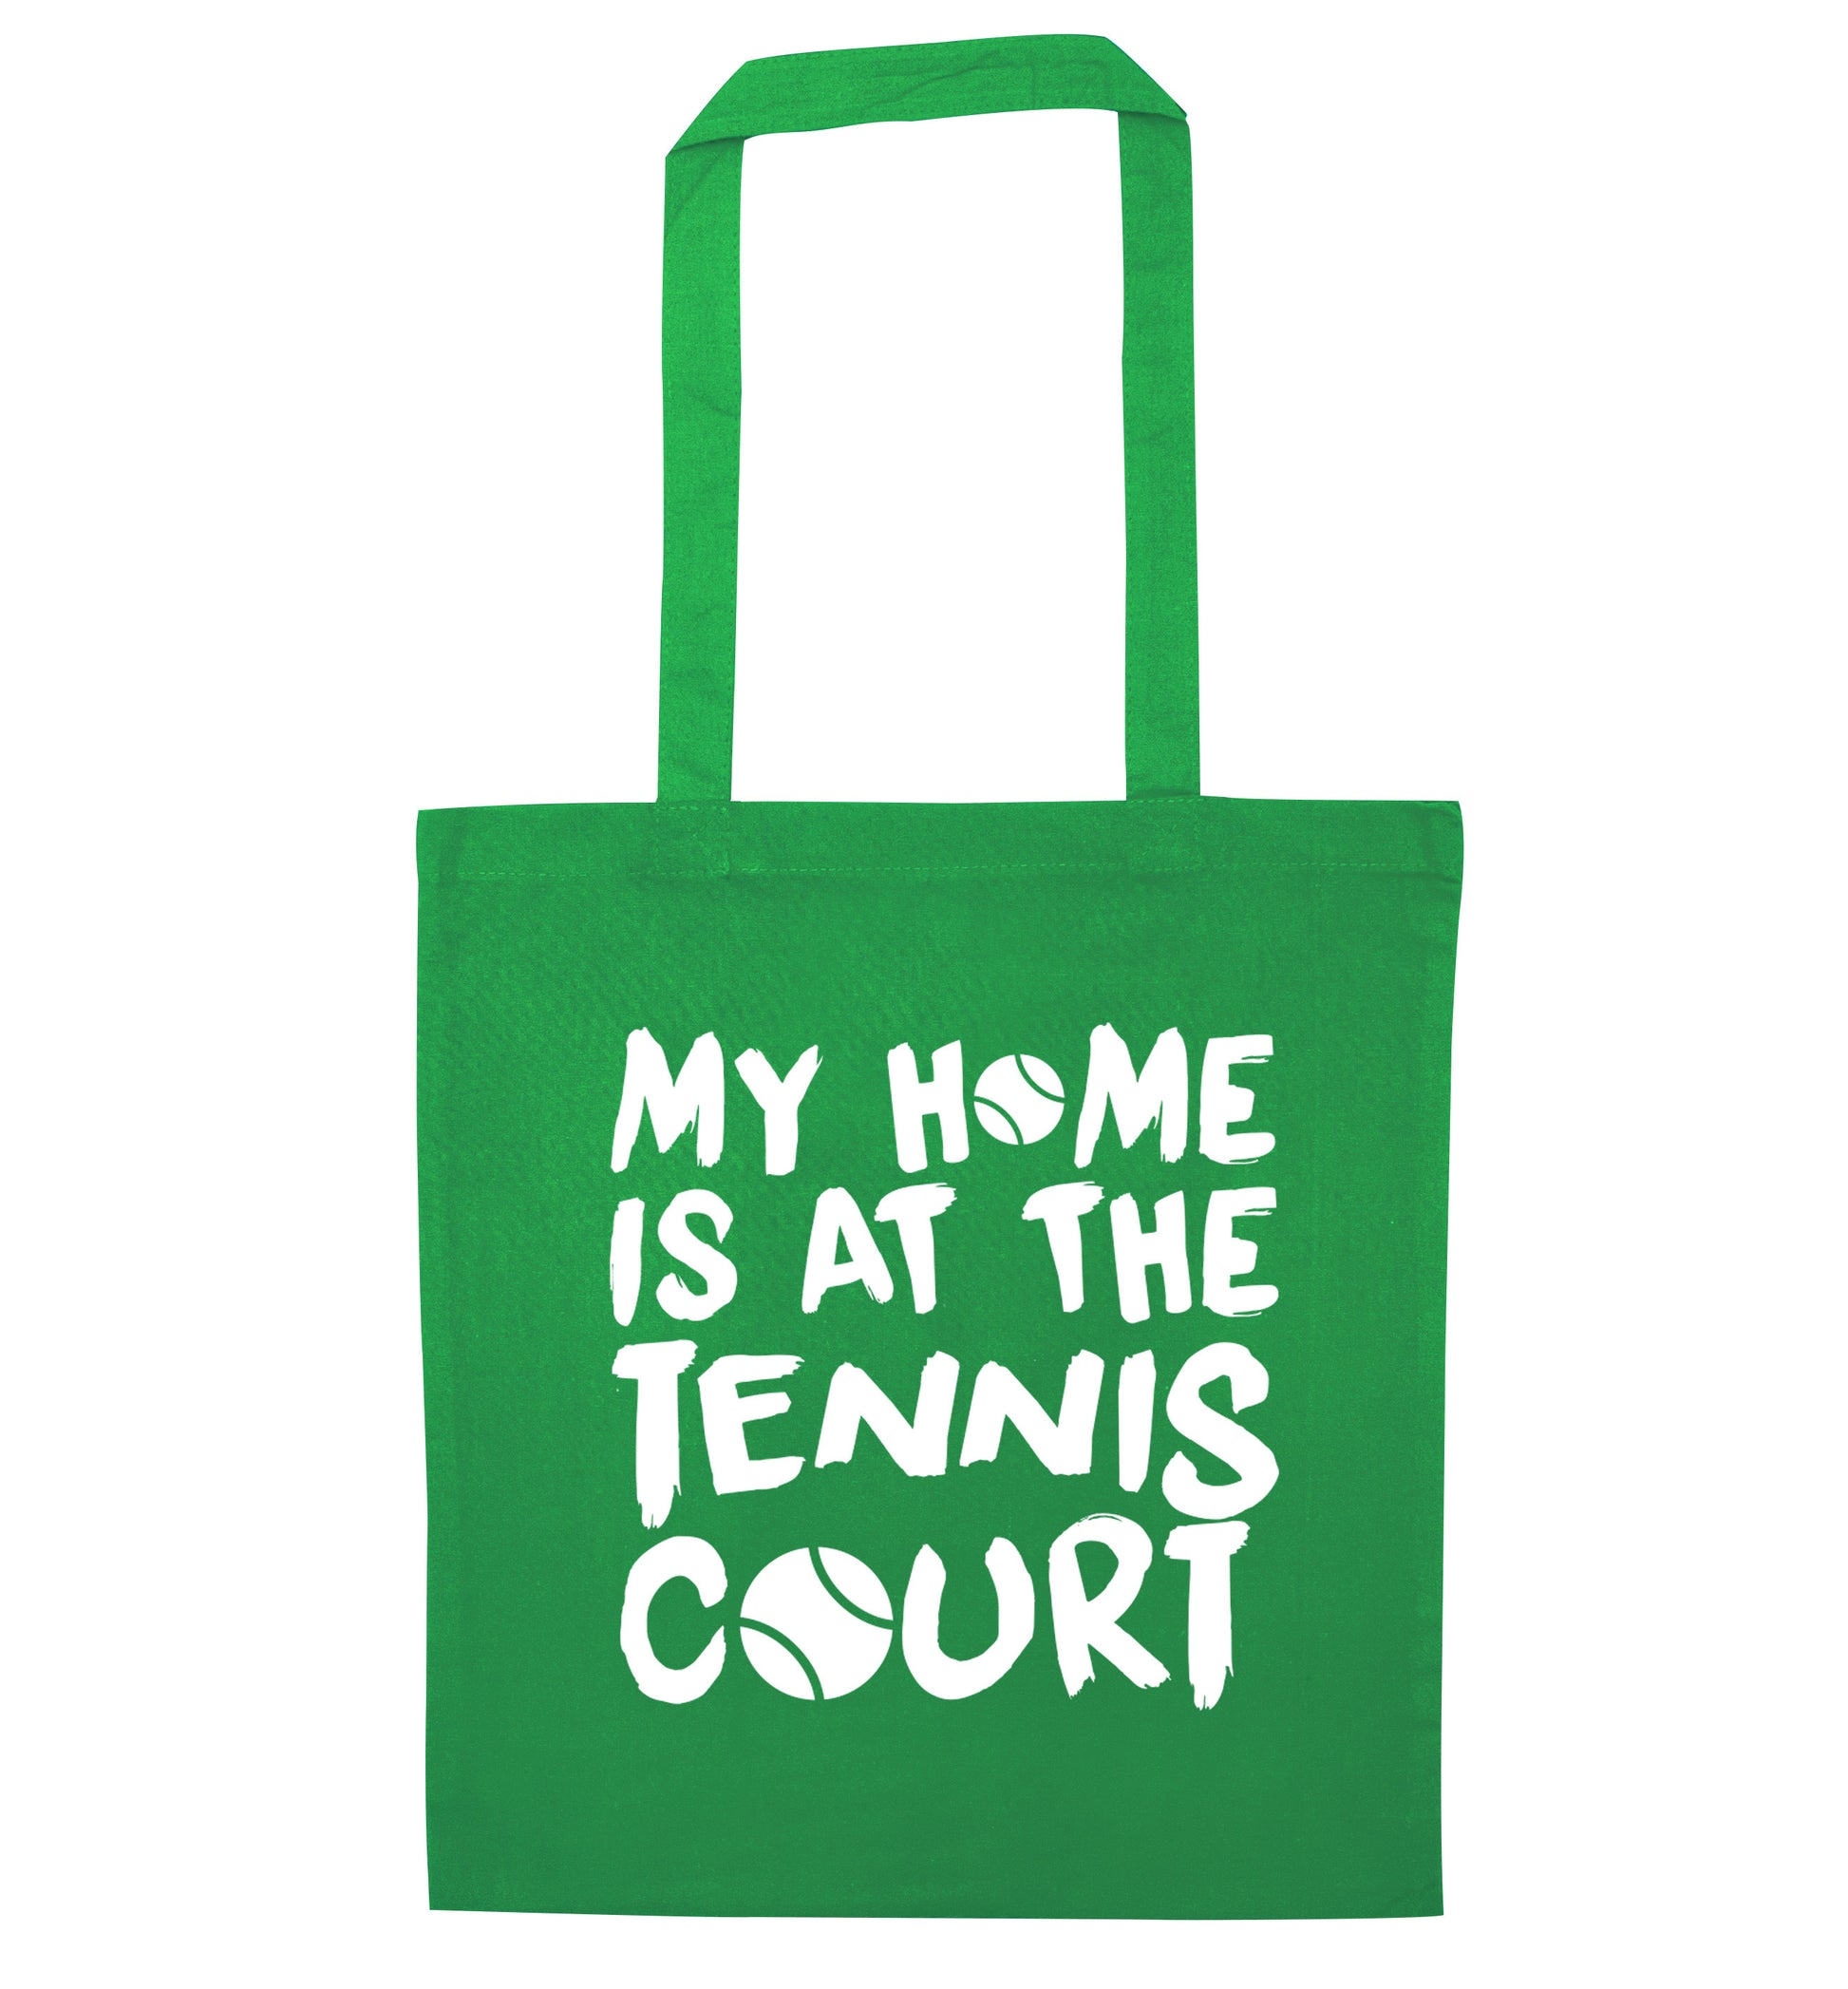 My home is at the tennis court green tote bag